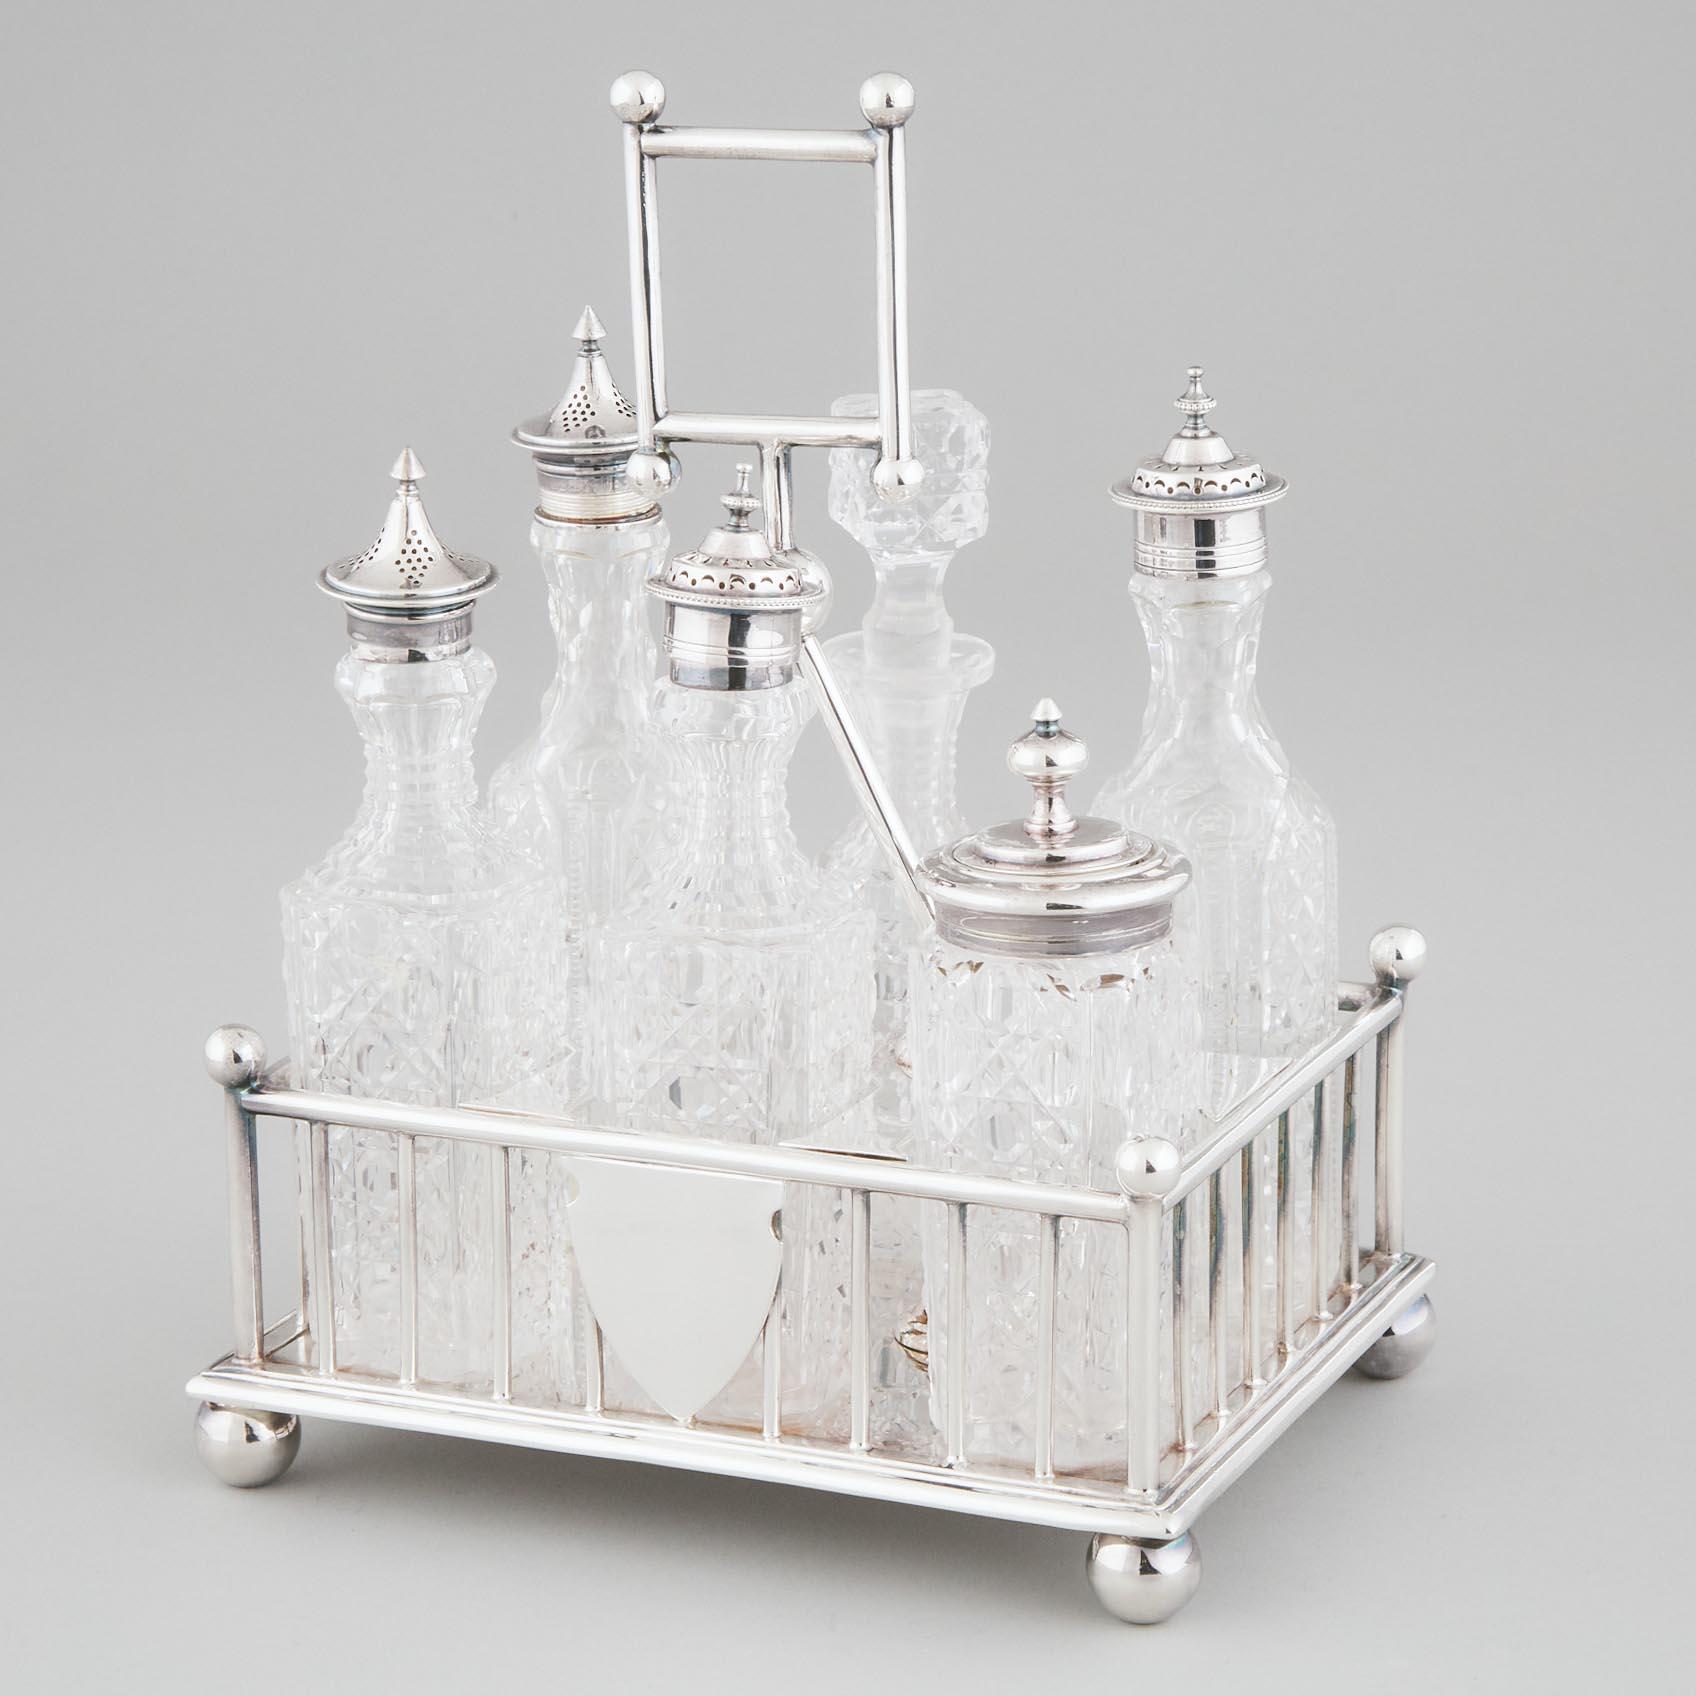 Late Victorian Silver Plated and Cut Glass Six-Bottle Cruet, Atkin Bros., late 19th century